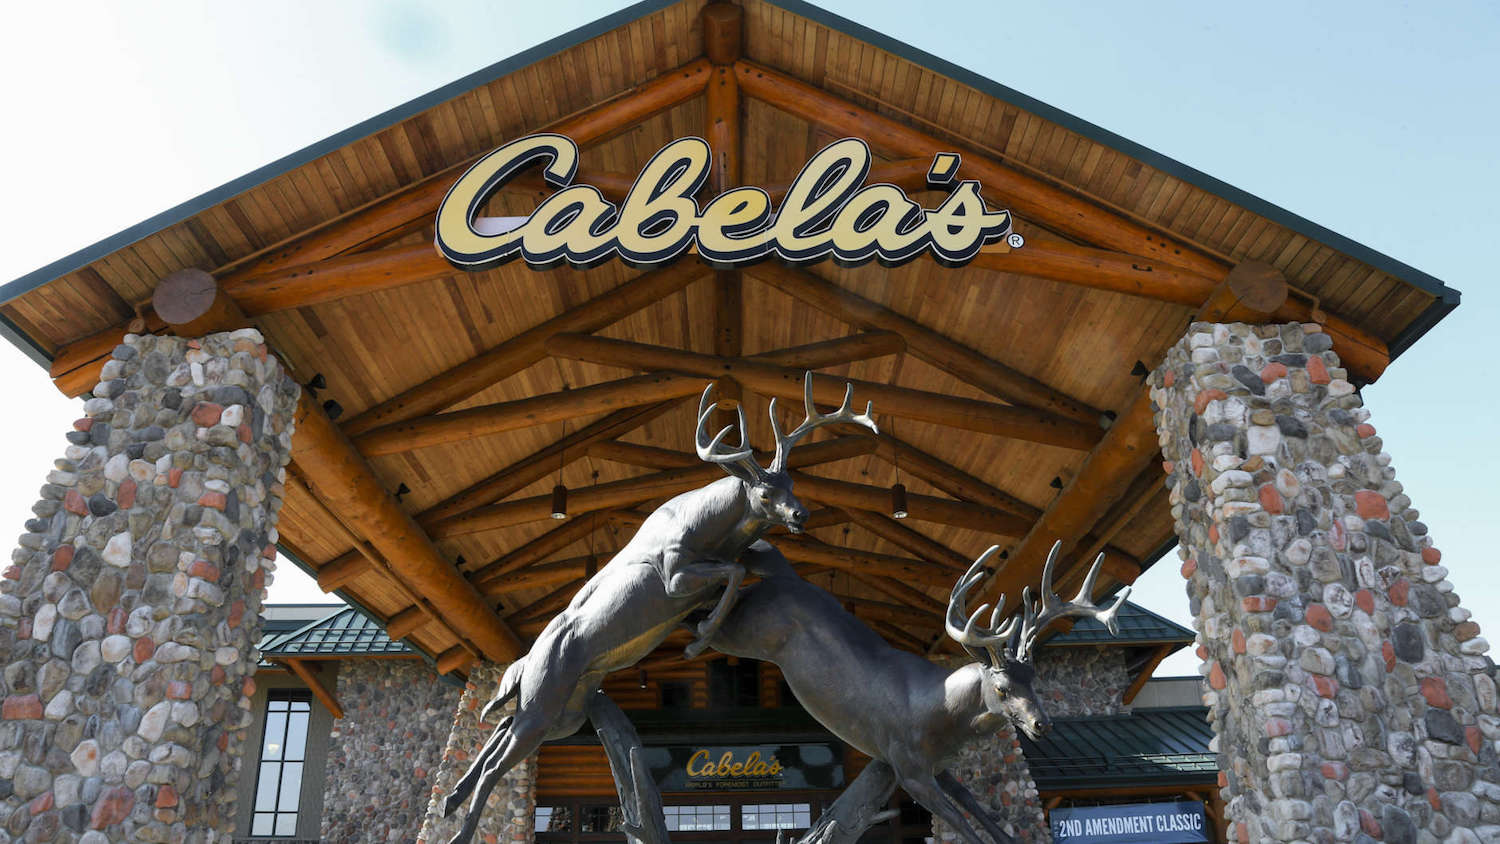 NRA Contributions Shine In First D.C.-Area Cabela’s Location, Opening March 9